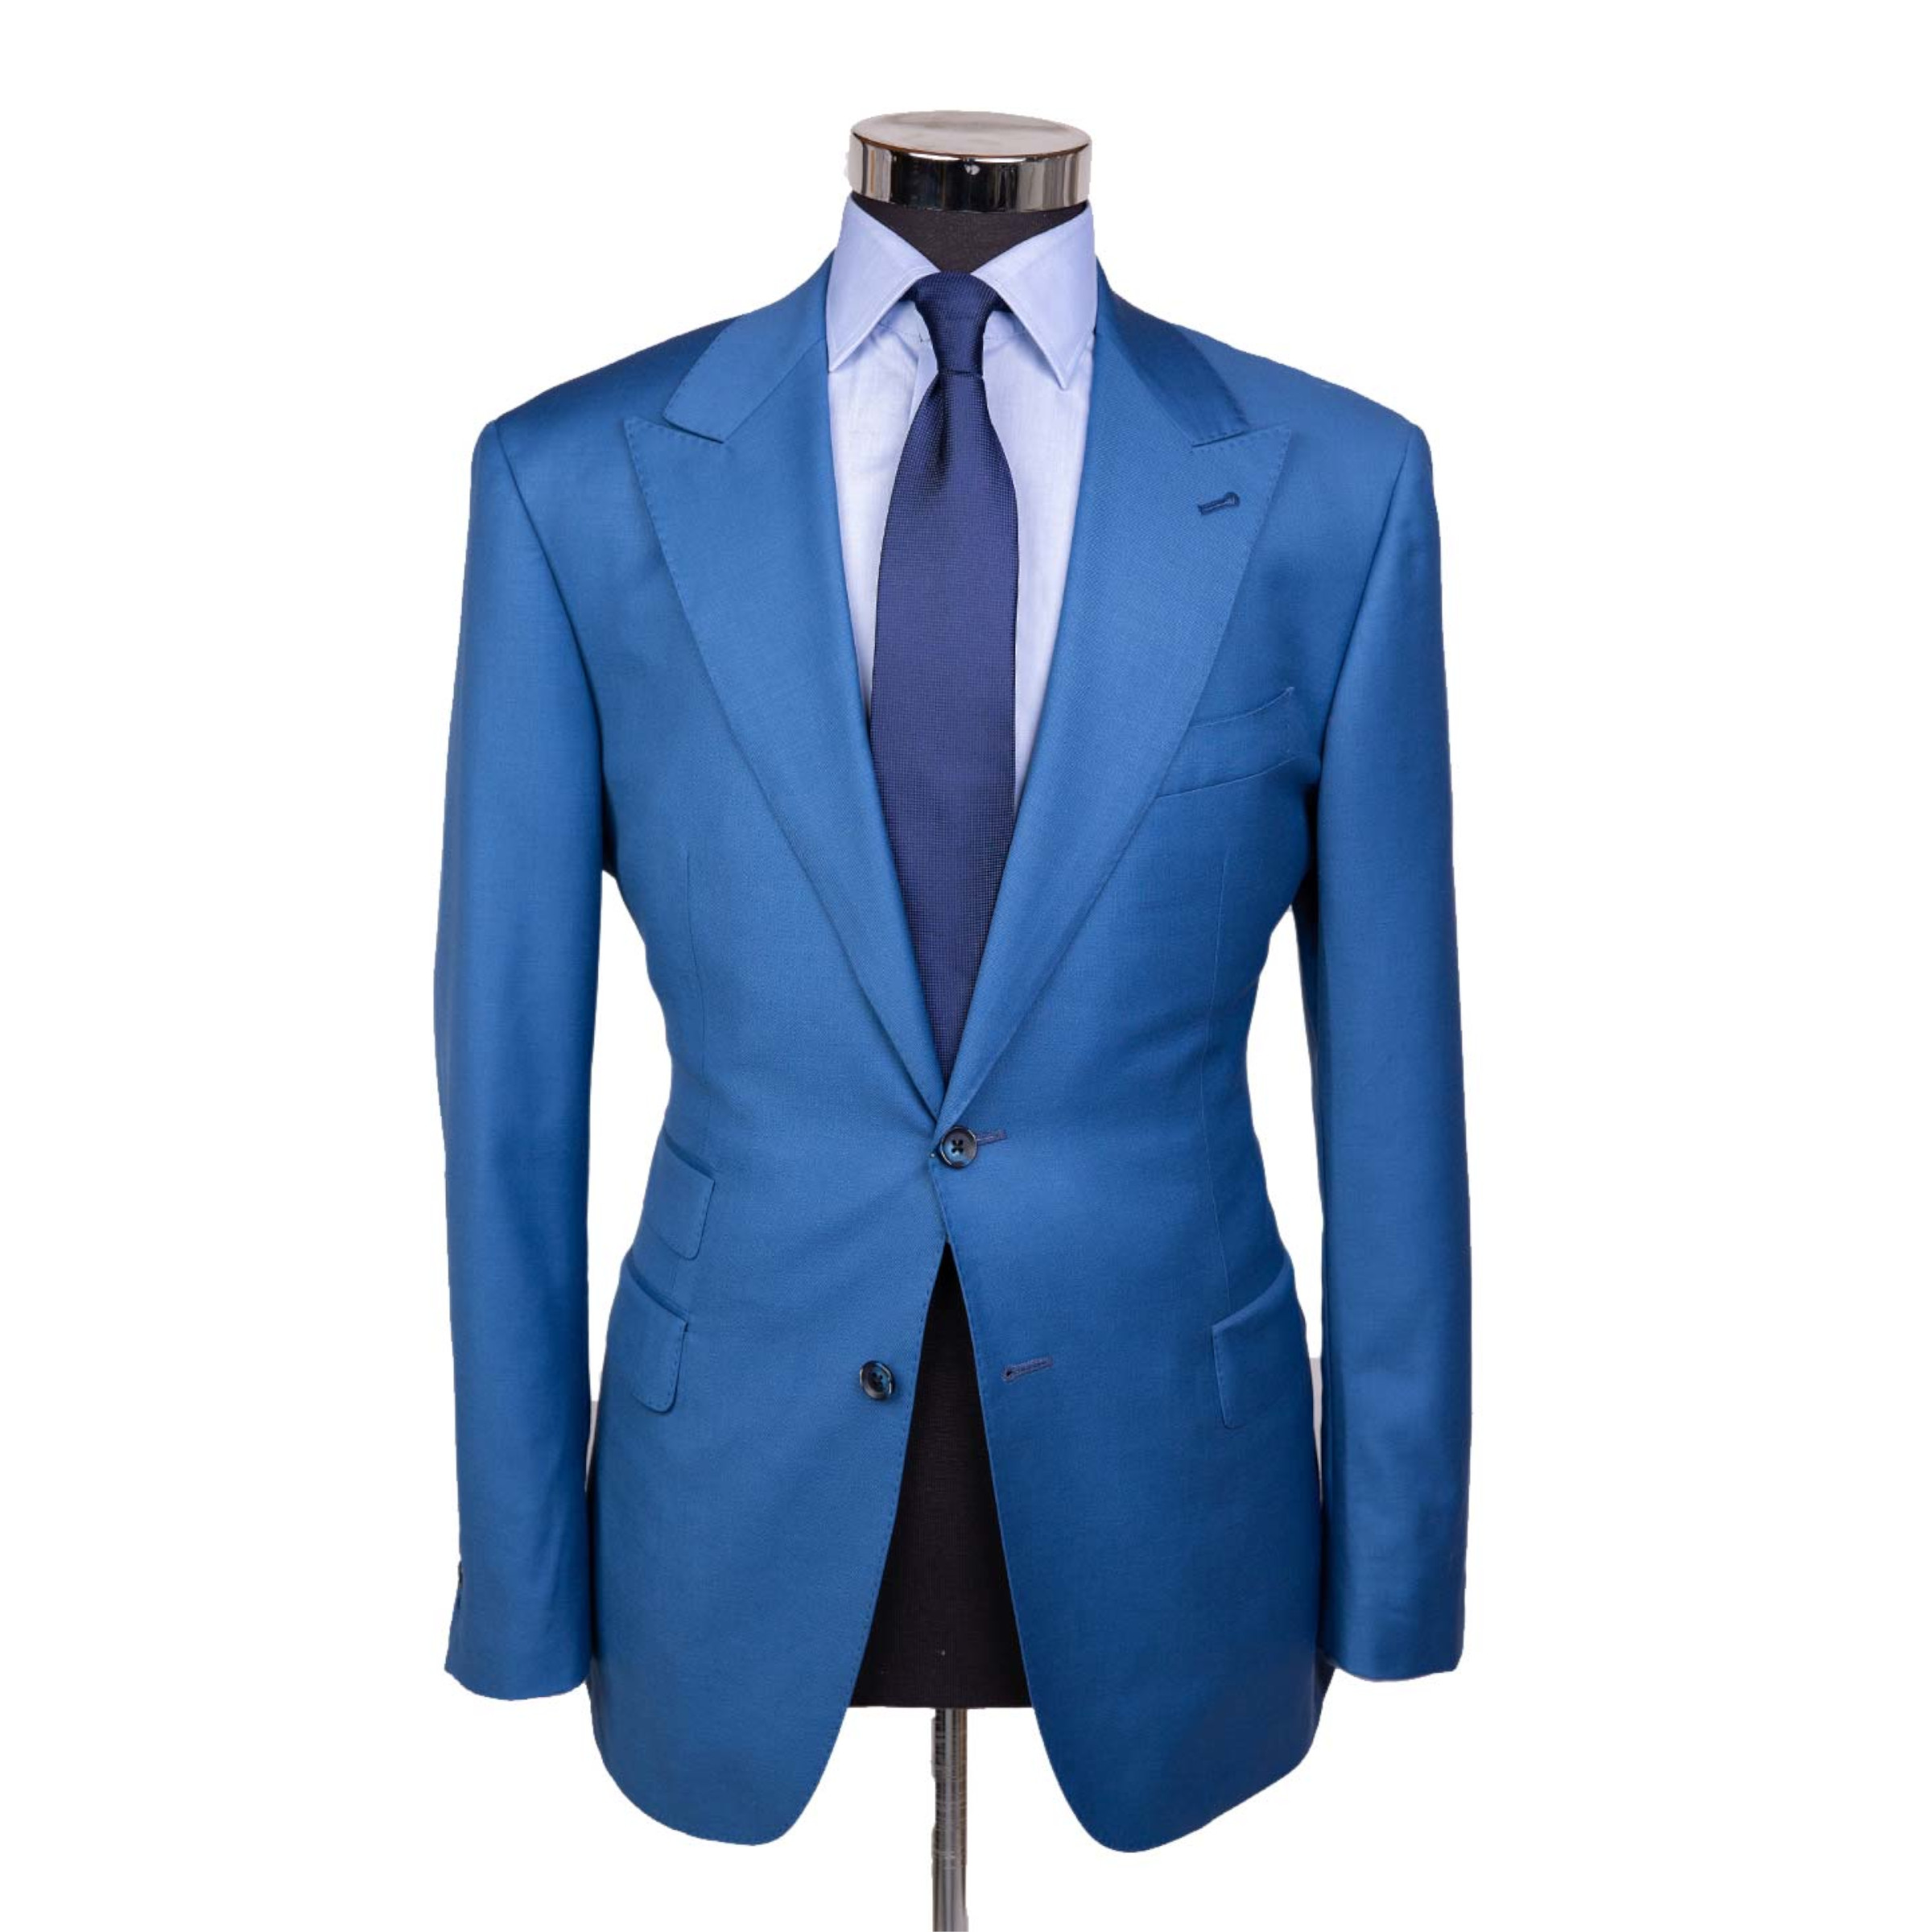 A bright sky blue suit jacket on a body form with a cobalt blue tie and light blue shirt on a white background